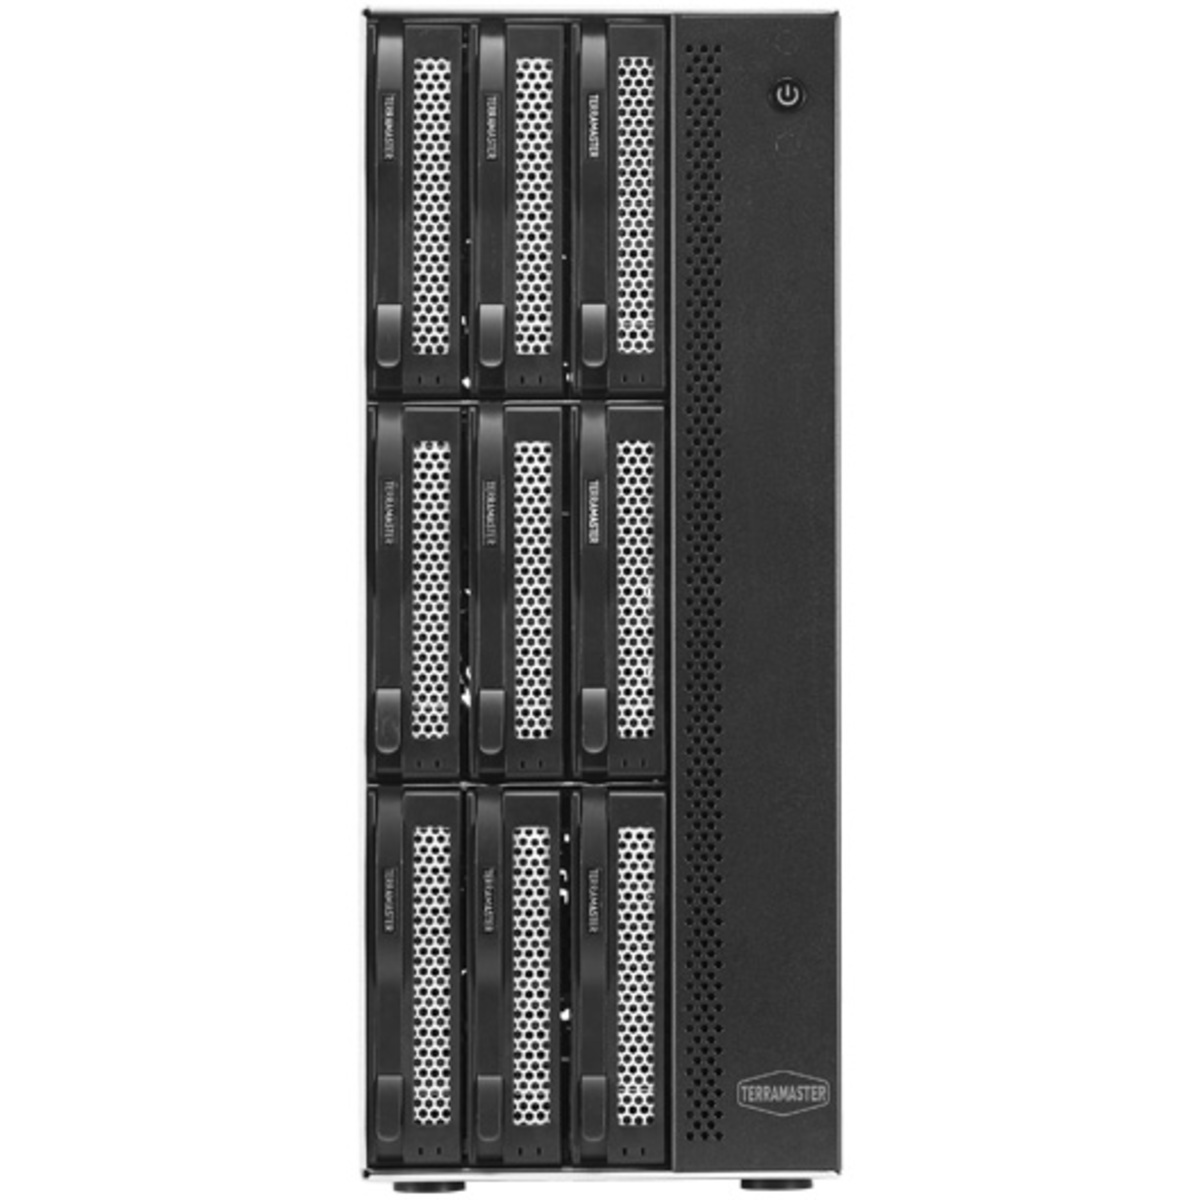 TerraMaster T9-450 168tb 9-Bay Desktop Multimedia / Power User / Business NAS - Network Attached Storage Device 7x24tb Western Digital Ultrastar HC580 SED WUH722424ALE6L1 3.5 7200rpm SATA 6Gb/s HDD ENTERPRISE Class Drives Installed - Burn-In Tested T9-450